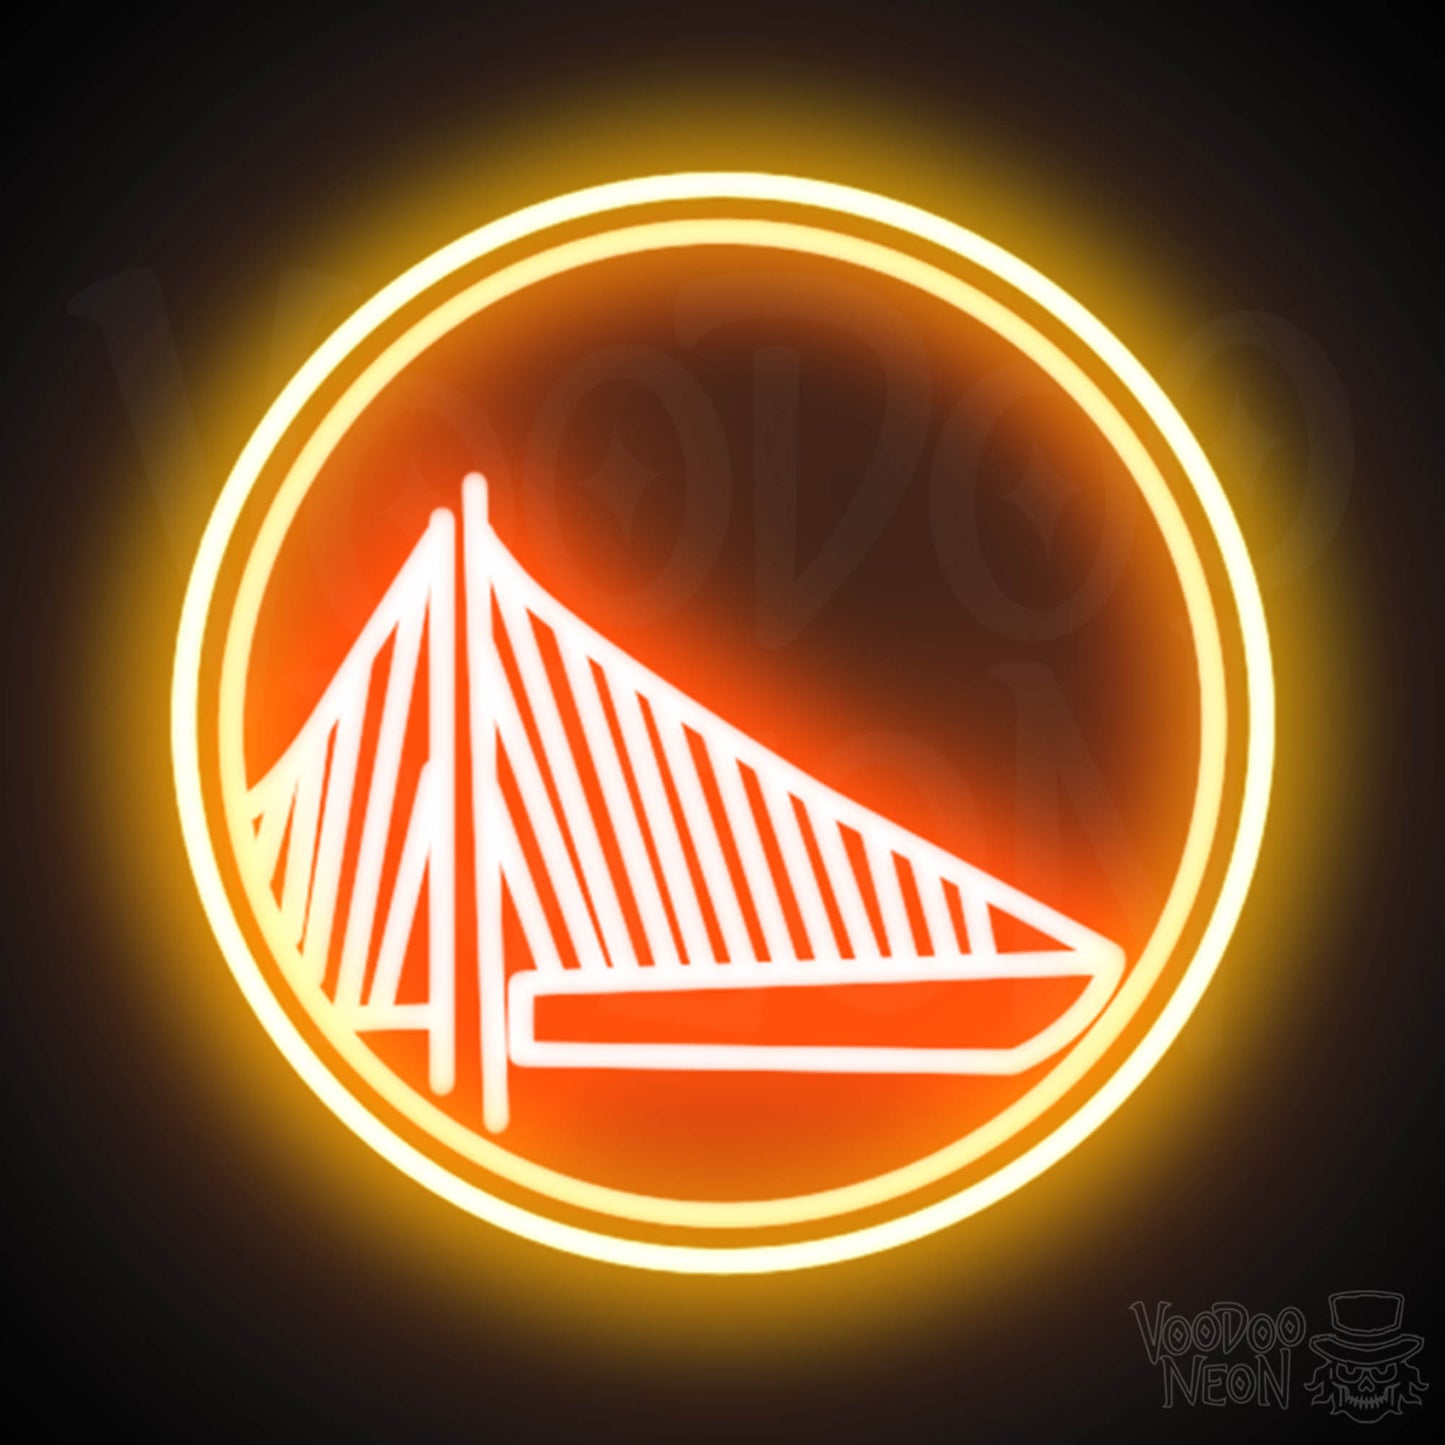 Golden State Warriors Neon Sign - Golden State Warriors Sign - Neon Warriors Logo Wall Art - Color Multi-Color